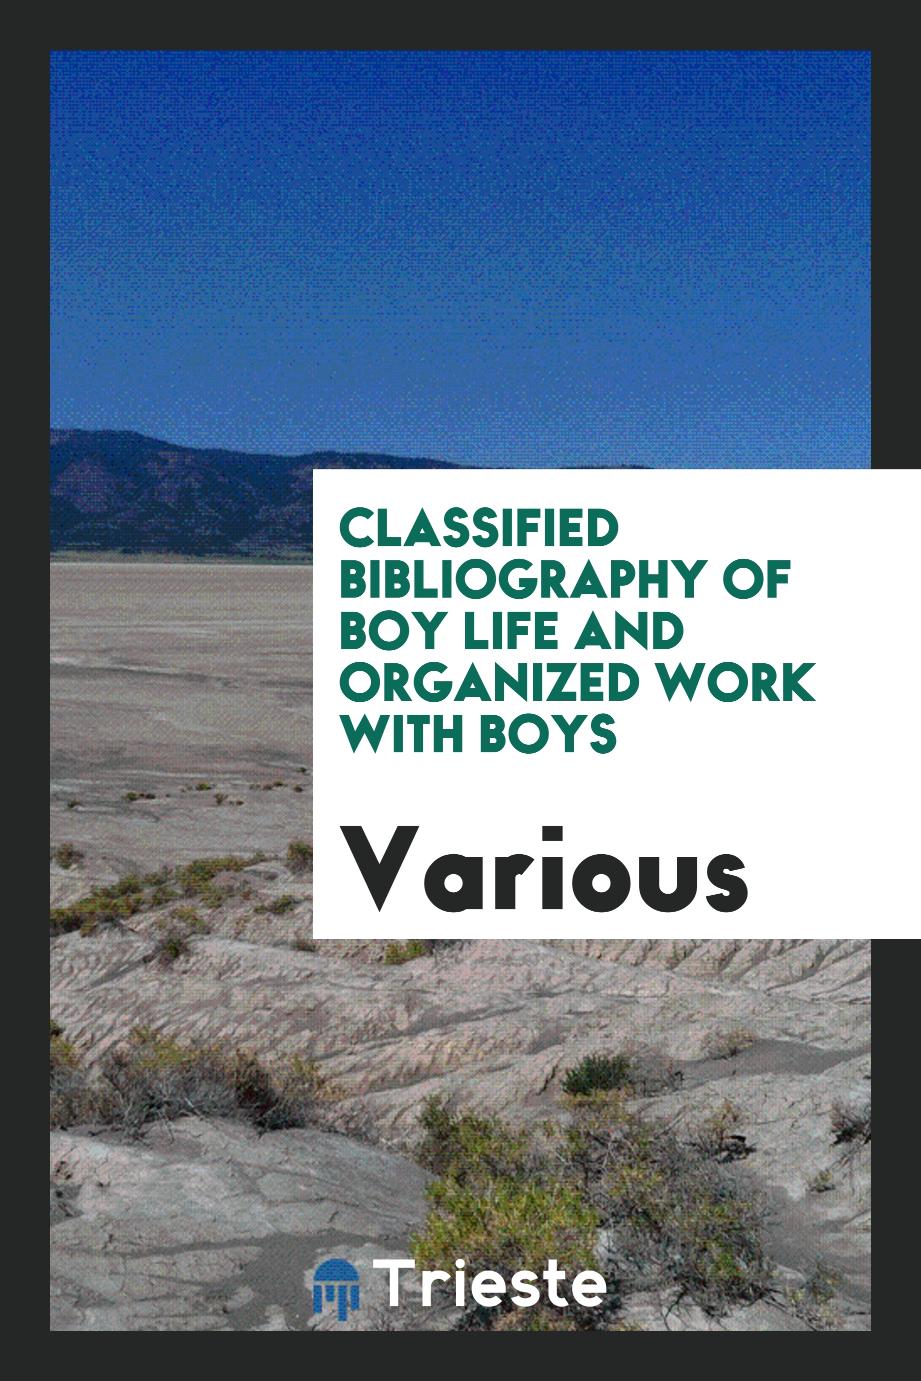 Classified bibliography of boy life and organized work with boys